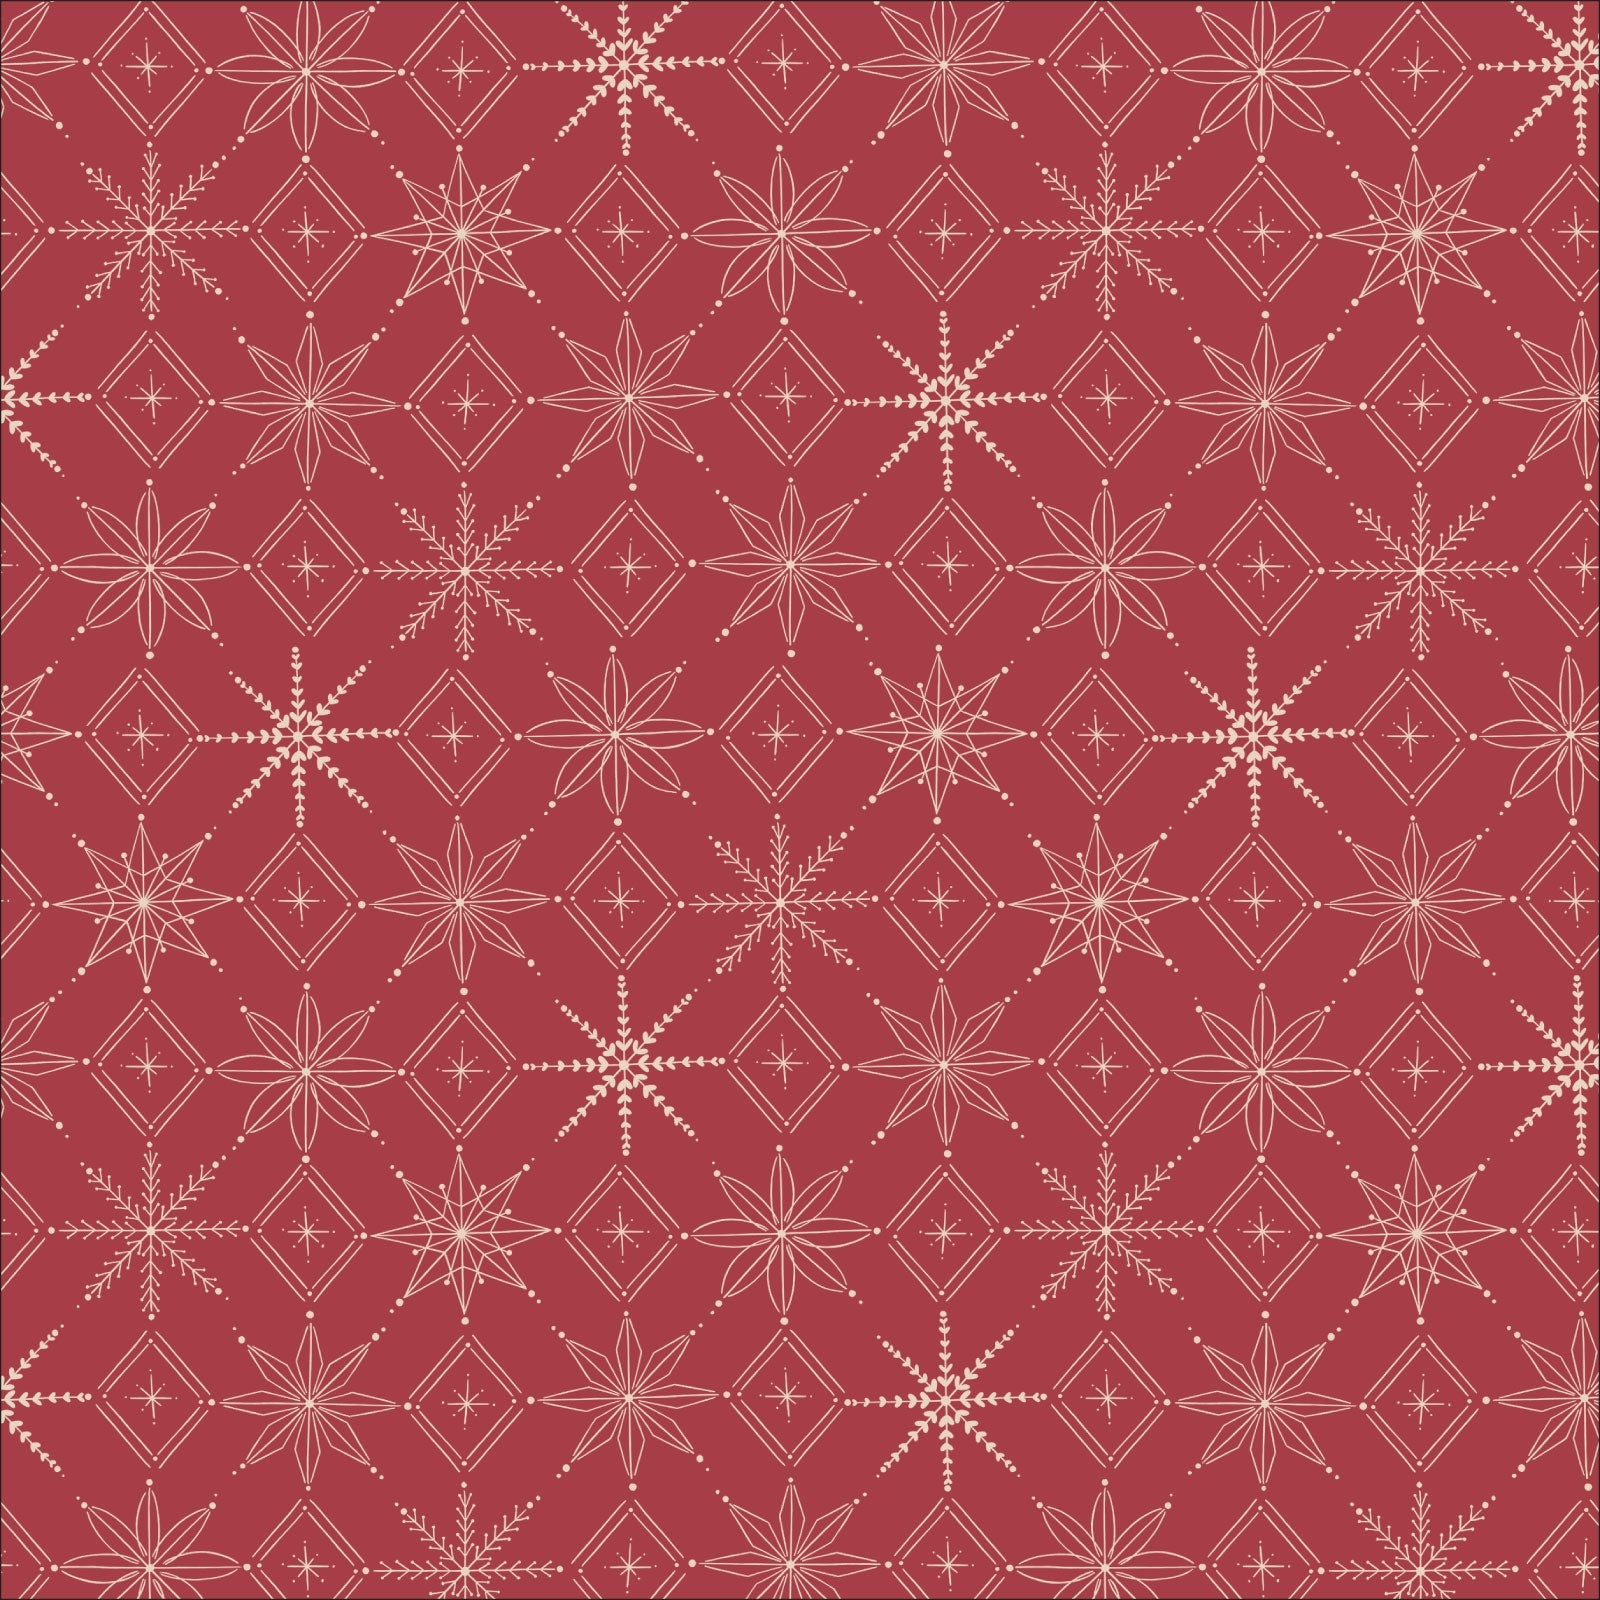 Snowflakes Red Fabric | Warm & Cozy